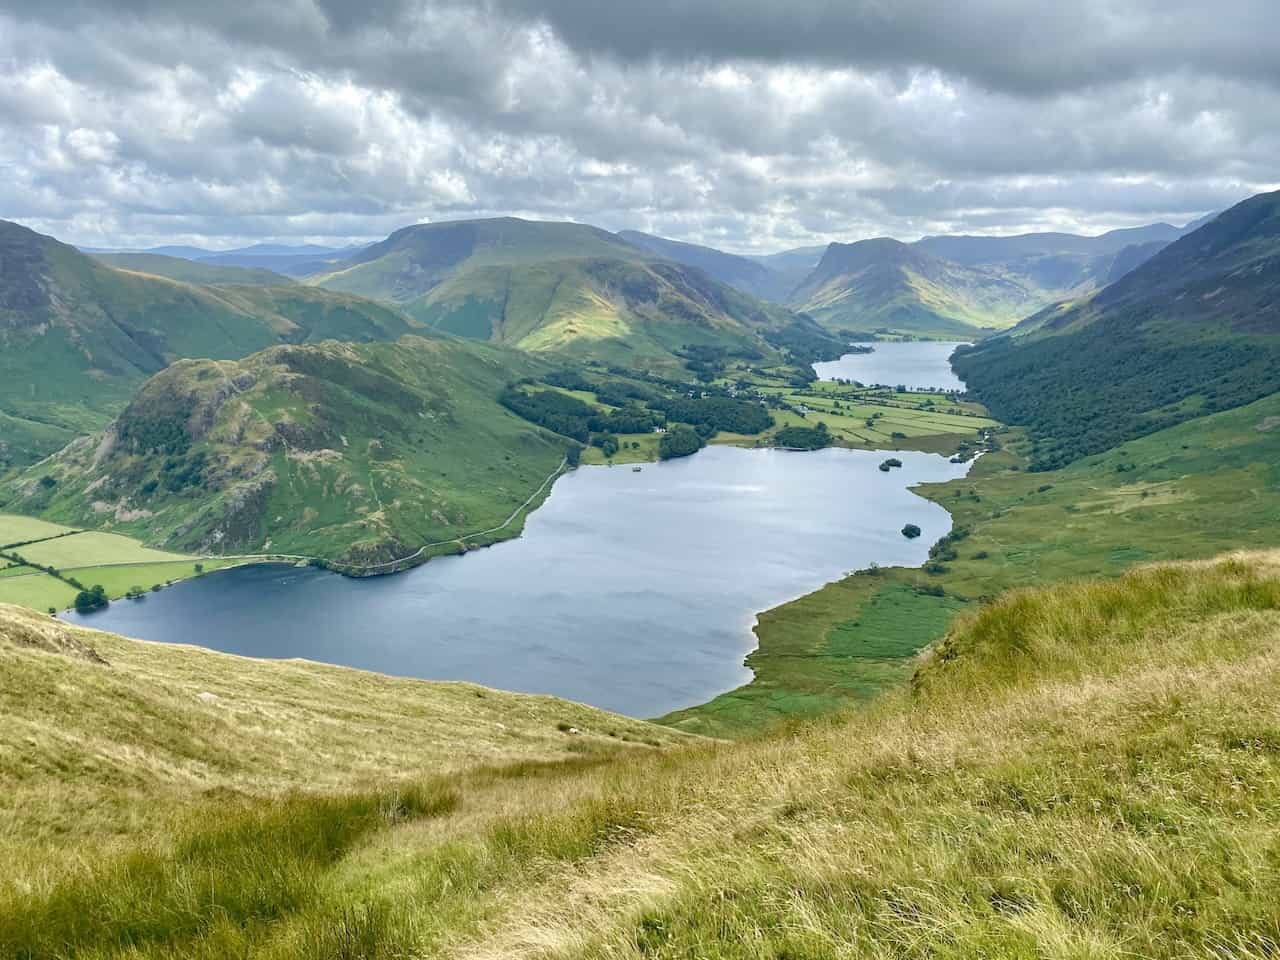 A little further along and both Crummock Water and Buttermere become fully visible. The small hill in the foreground on the left is Rannerdale Knotts, renowned for its splendid bluebell coverage in May.